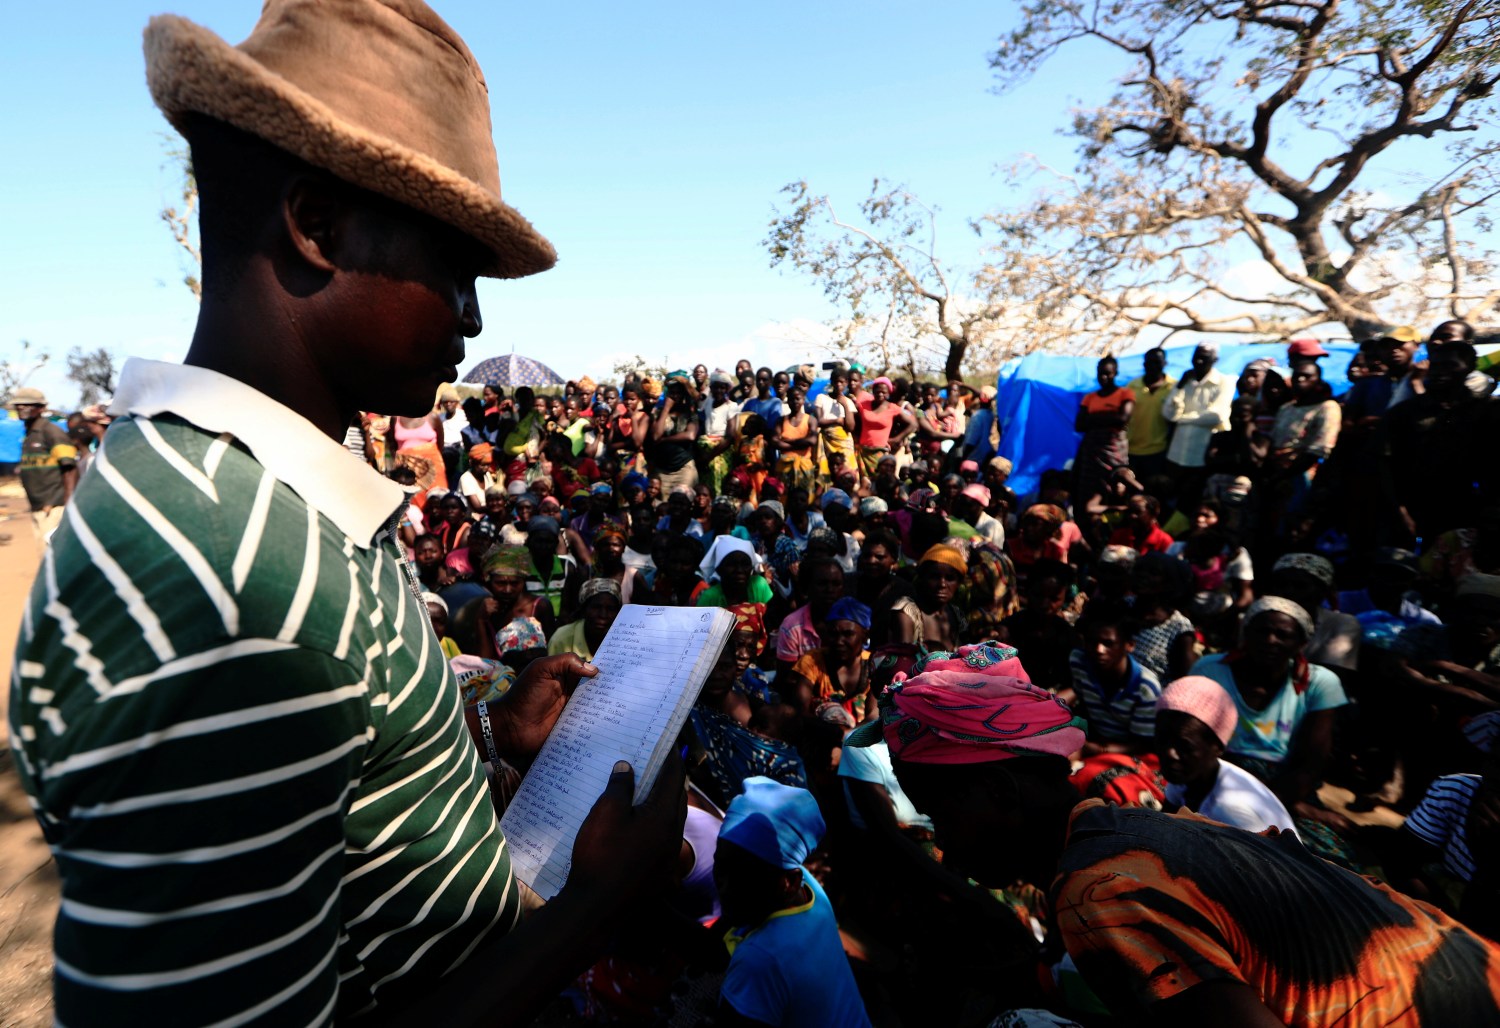 People wait to receive aid at a camp for the people displaced in the aftermath of Cyclone Idai in John Segredo near Beira, Mozambique March 31, 2019. REUTERS/Zohra Bensemra?? - RC11914B18B0